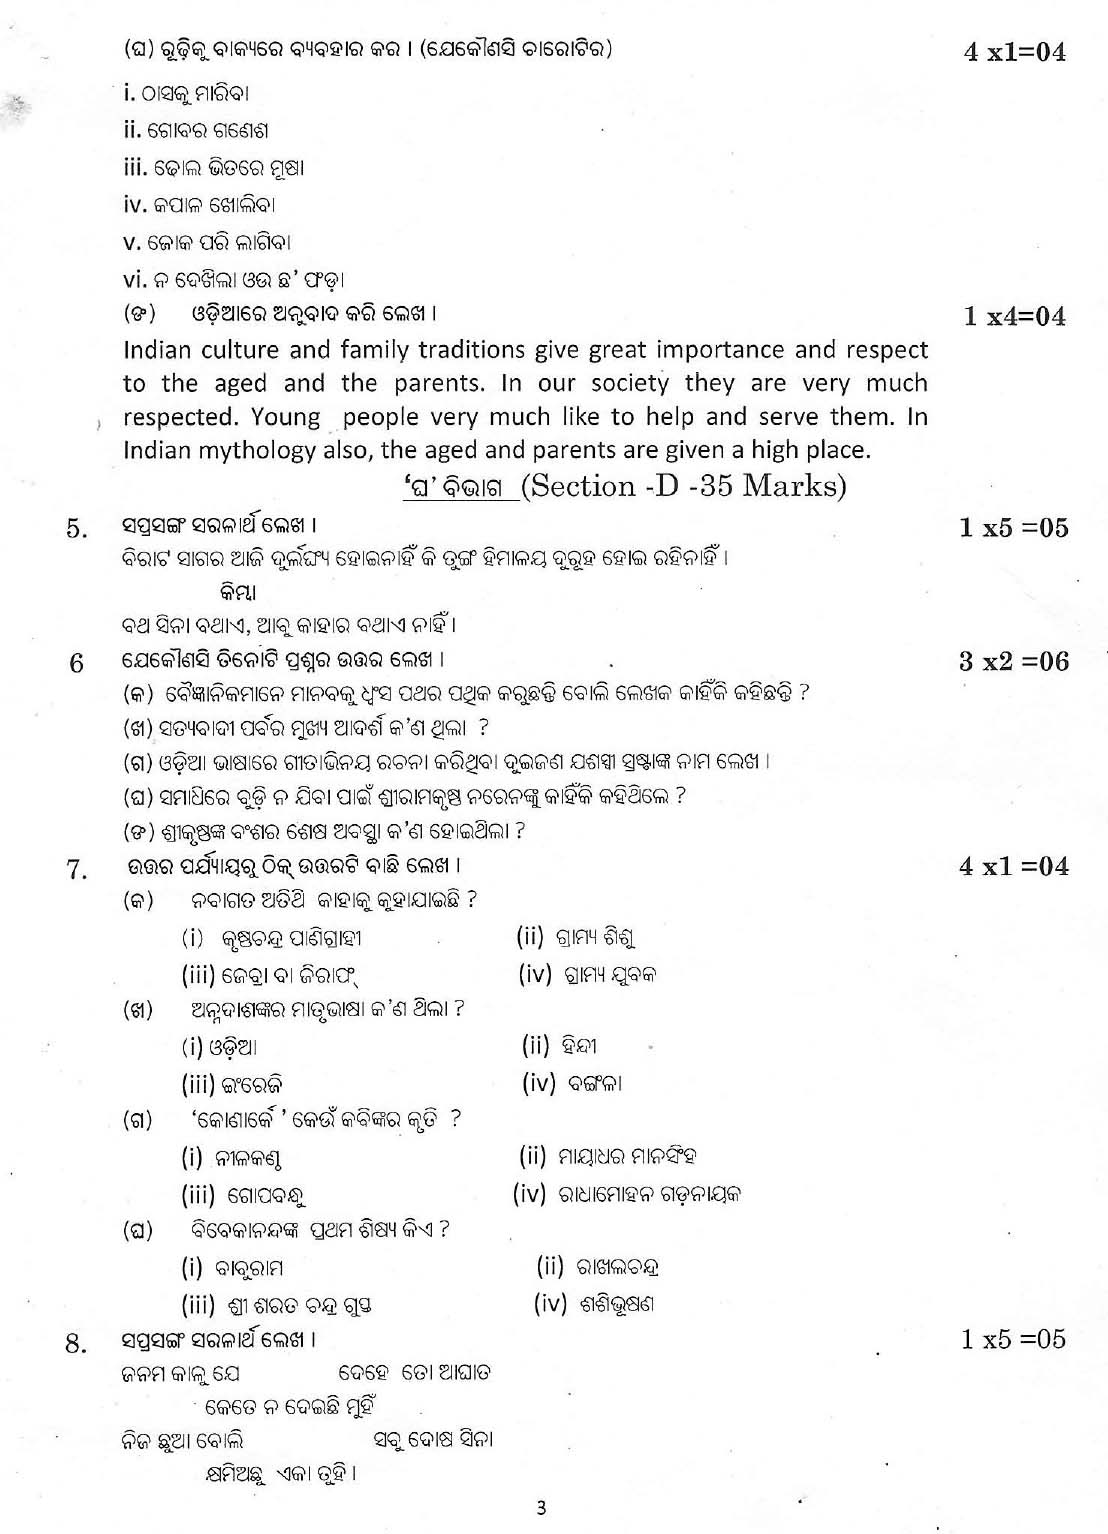 Odia CBSE Class X Sample Question Paper 2018-19 - Image 3